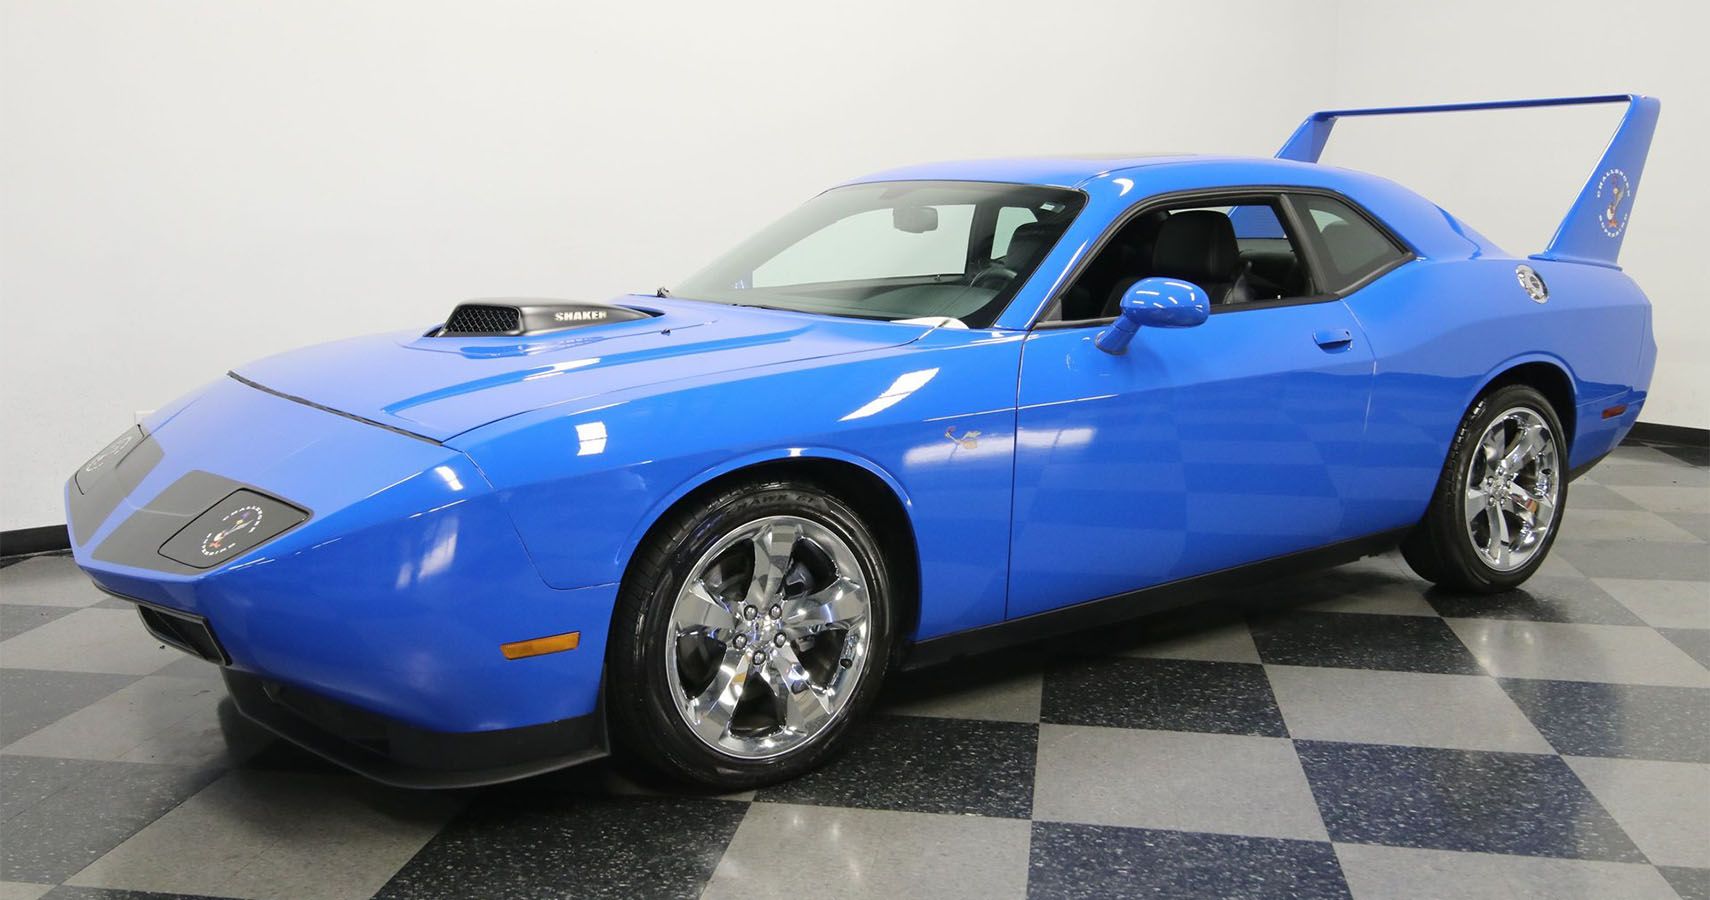 2014 Dodge Challenger Turned Into A Plymouth Superbird Tribute For Sale